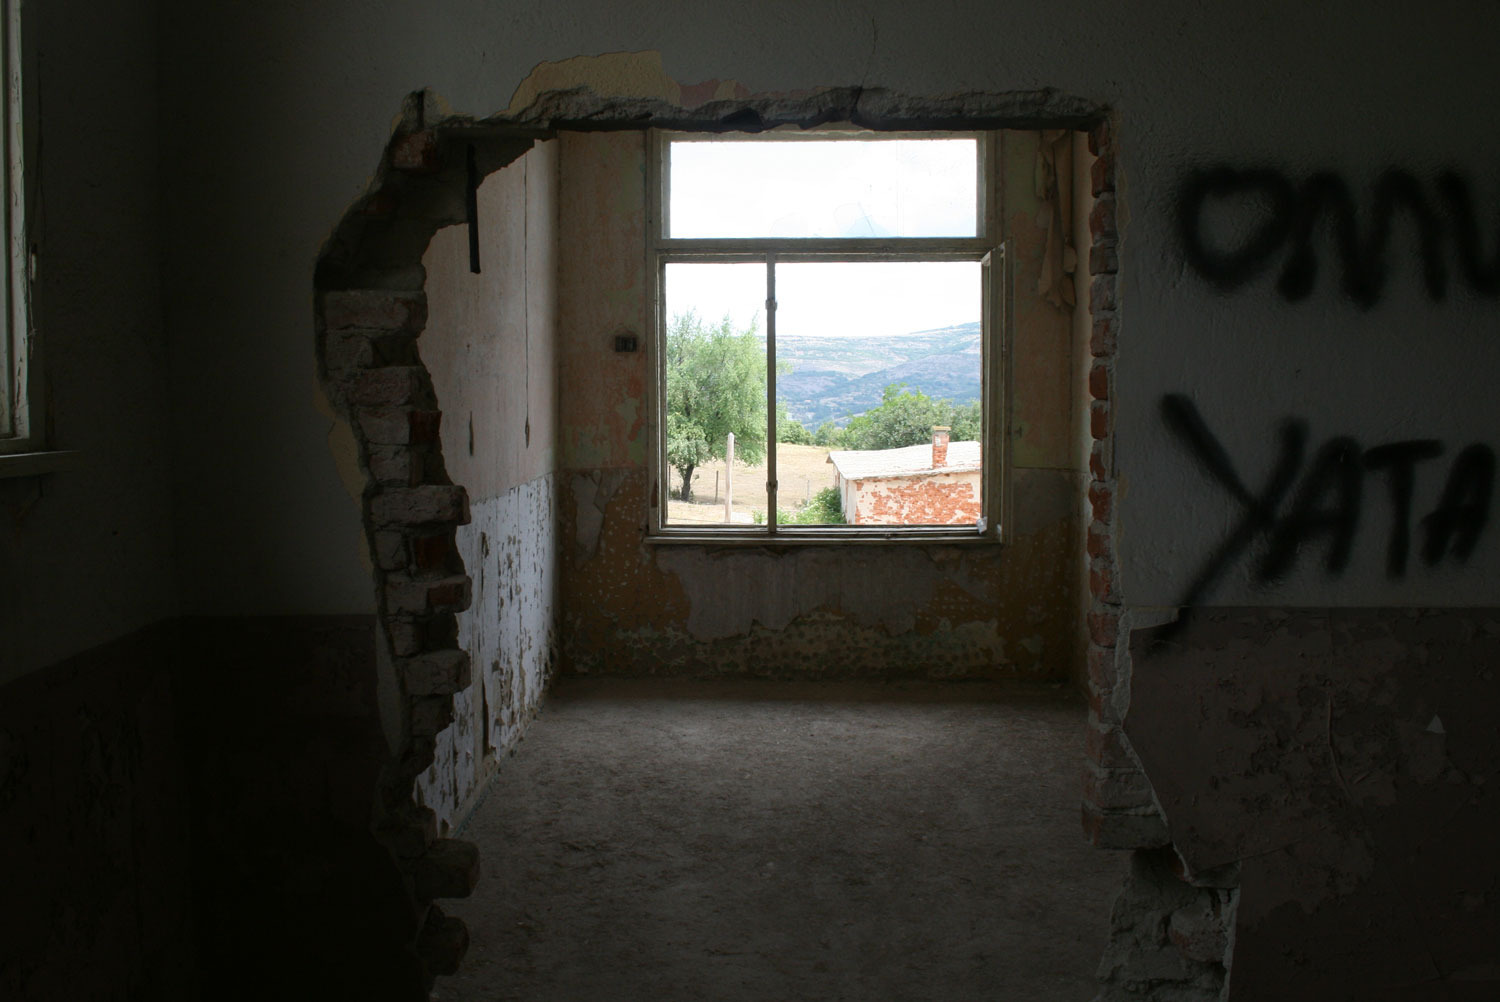 015-Looking-into-my-bedroom-the-gap-will-become-an-internal-window